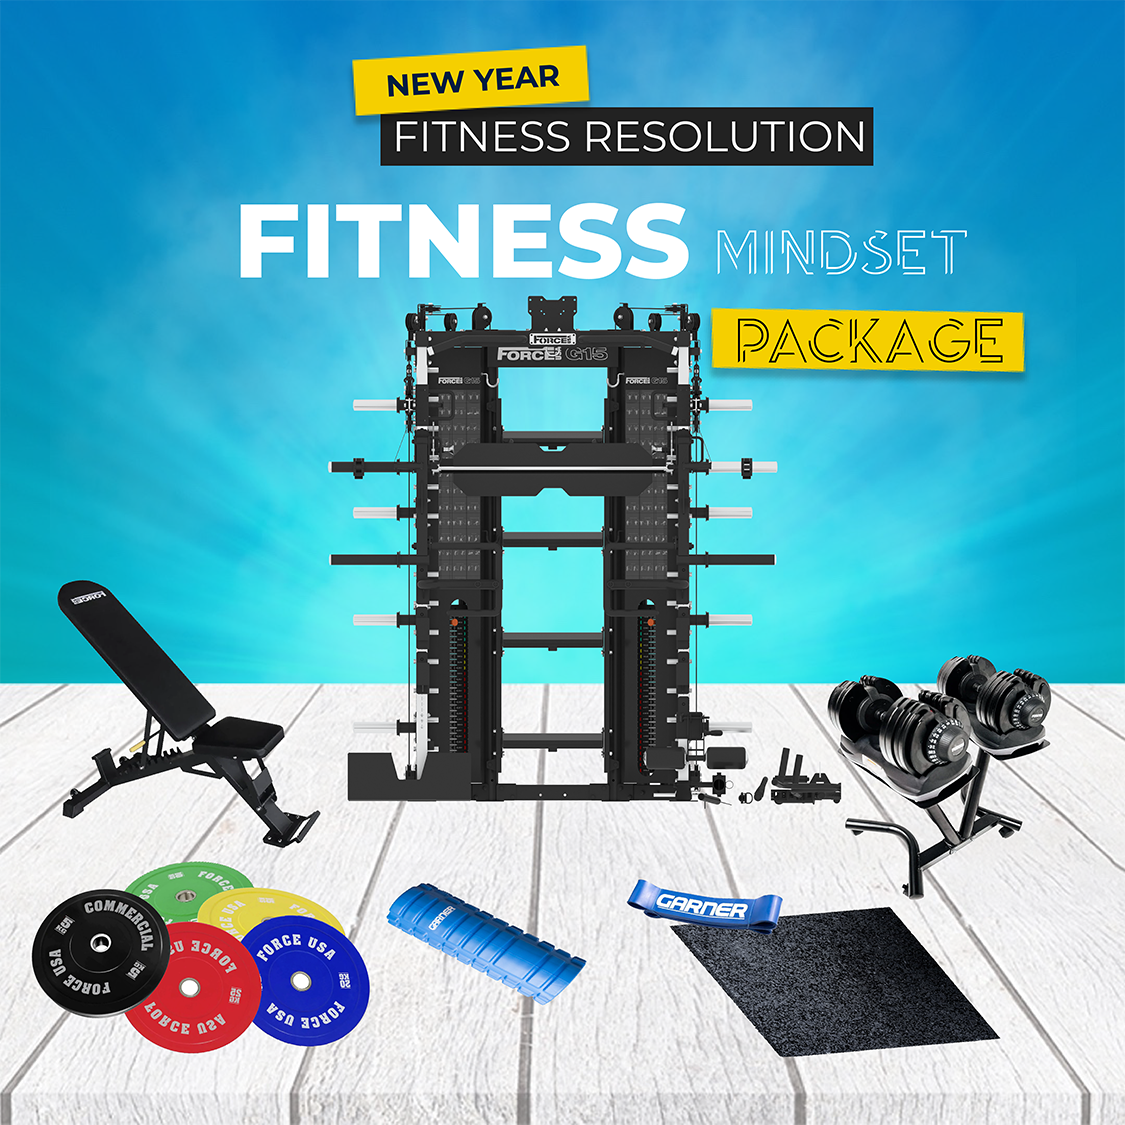 New Year Fitness Resolution Package #3  Fitness Mindset Edition